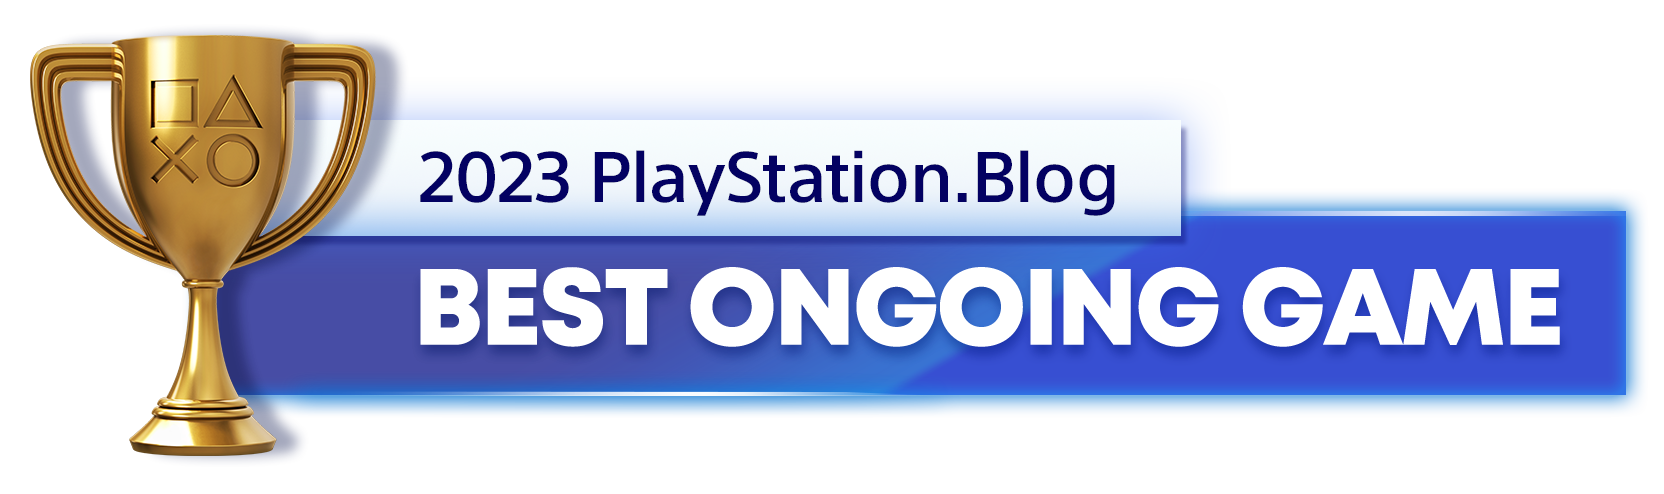  "Gold Trophy for the 2023 PlayStation Blog Best Ongoing Game Winner"